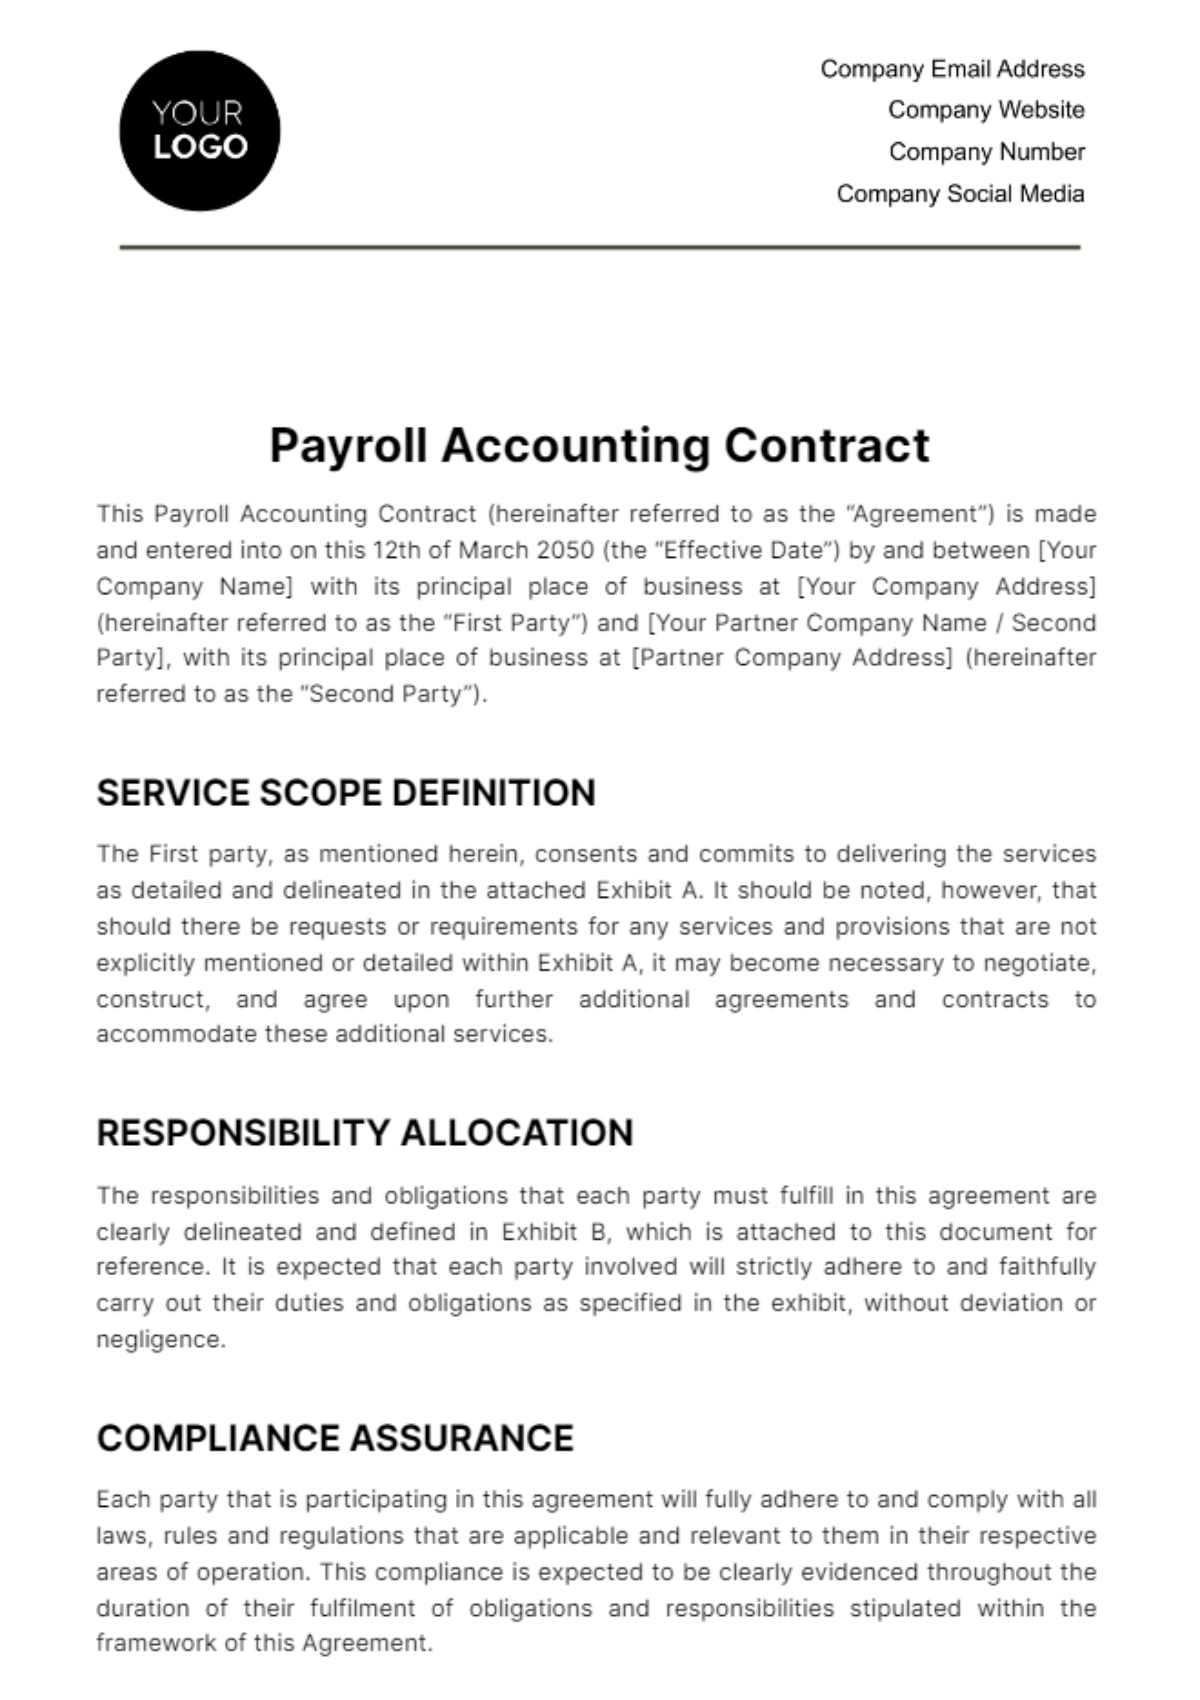 Payroll Accounting Contract Template